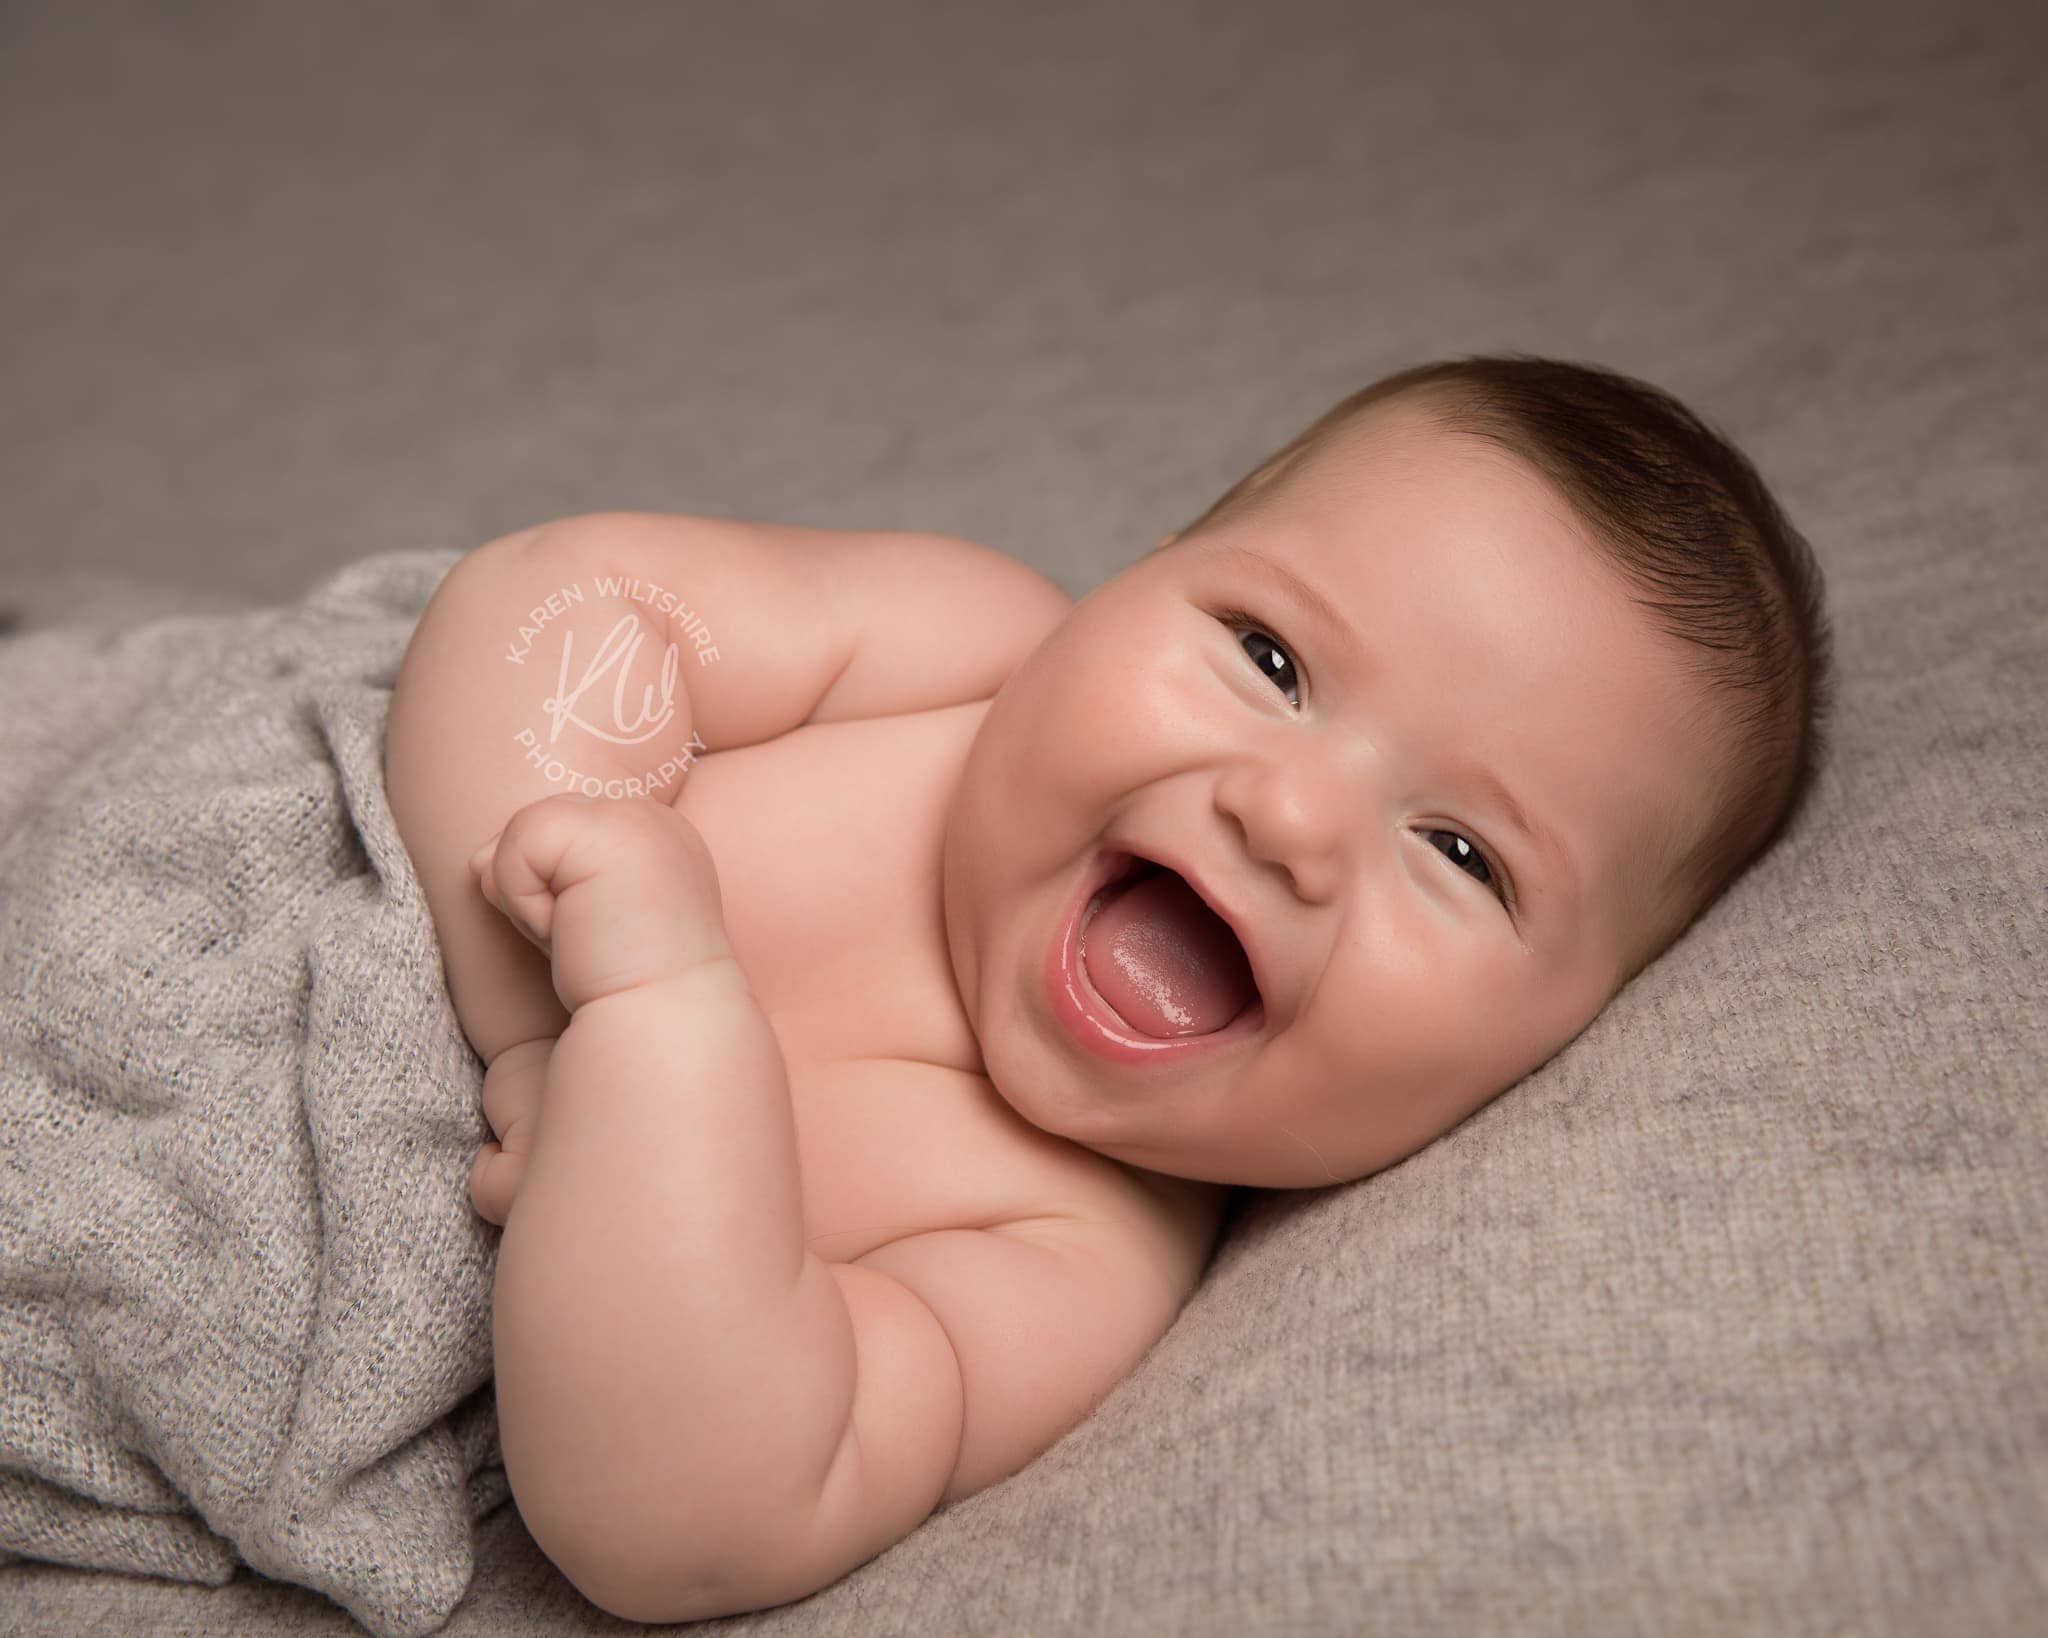 Very happy baby laughing at the camera